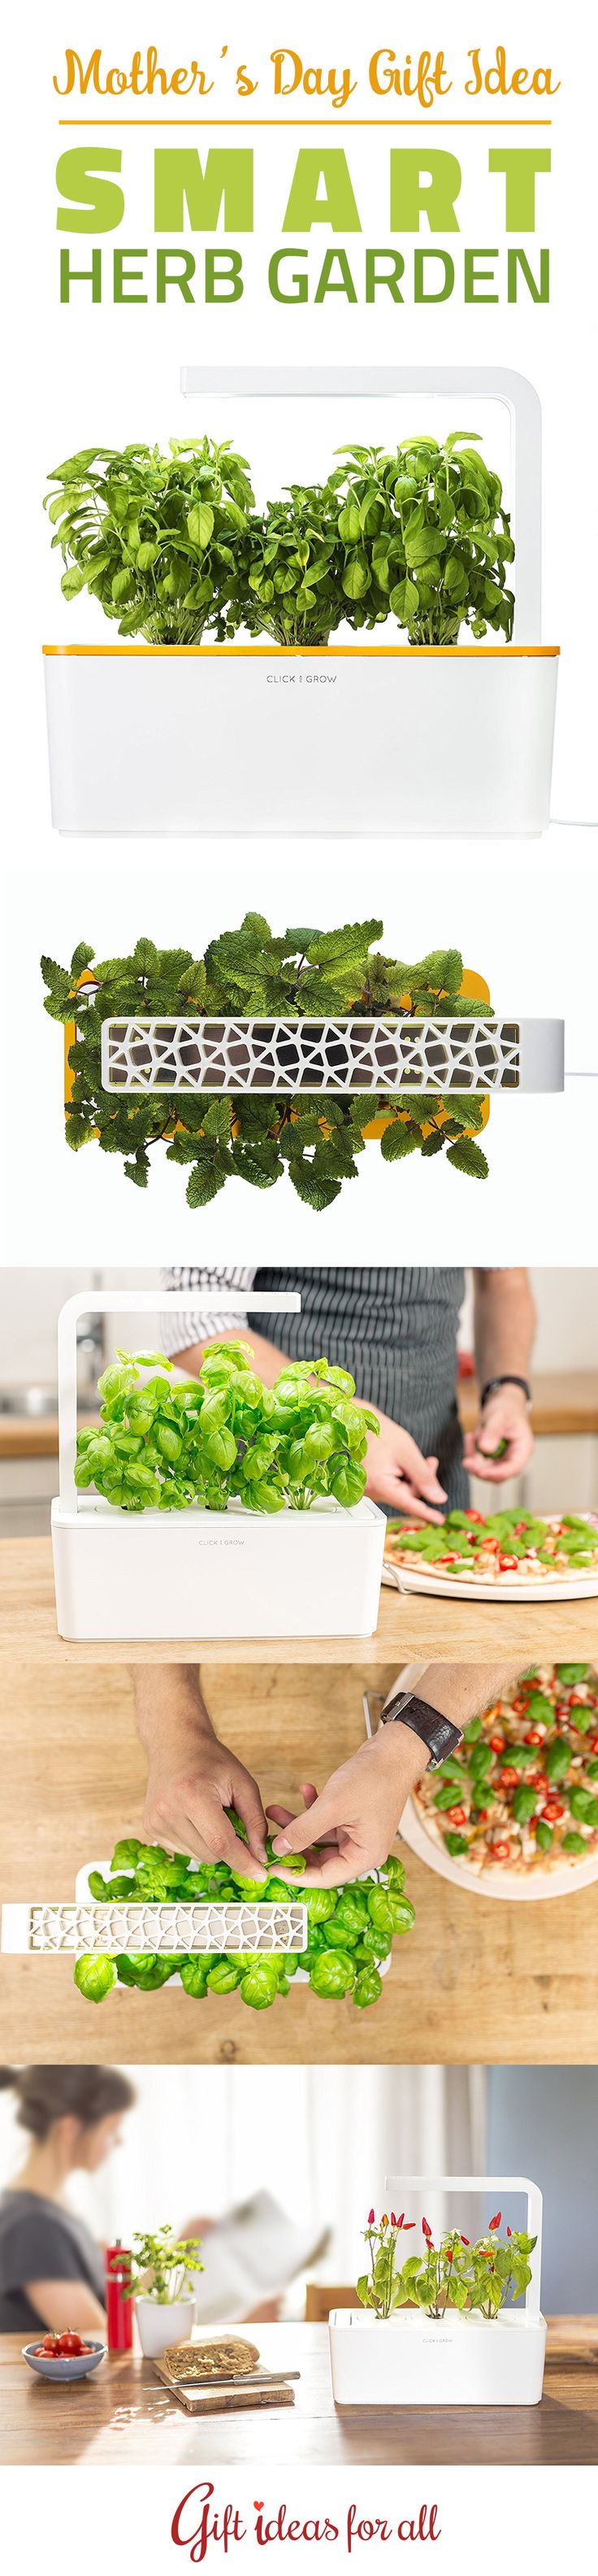 Smart Herb Garden - 20 Unconventional Mother’s Day #Gift Ideas to Put A Smile ...